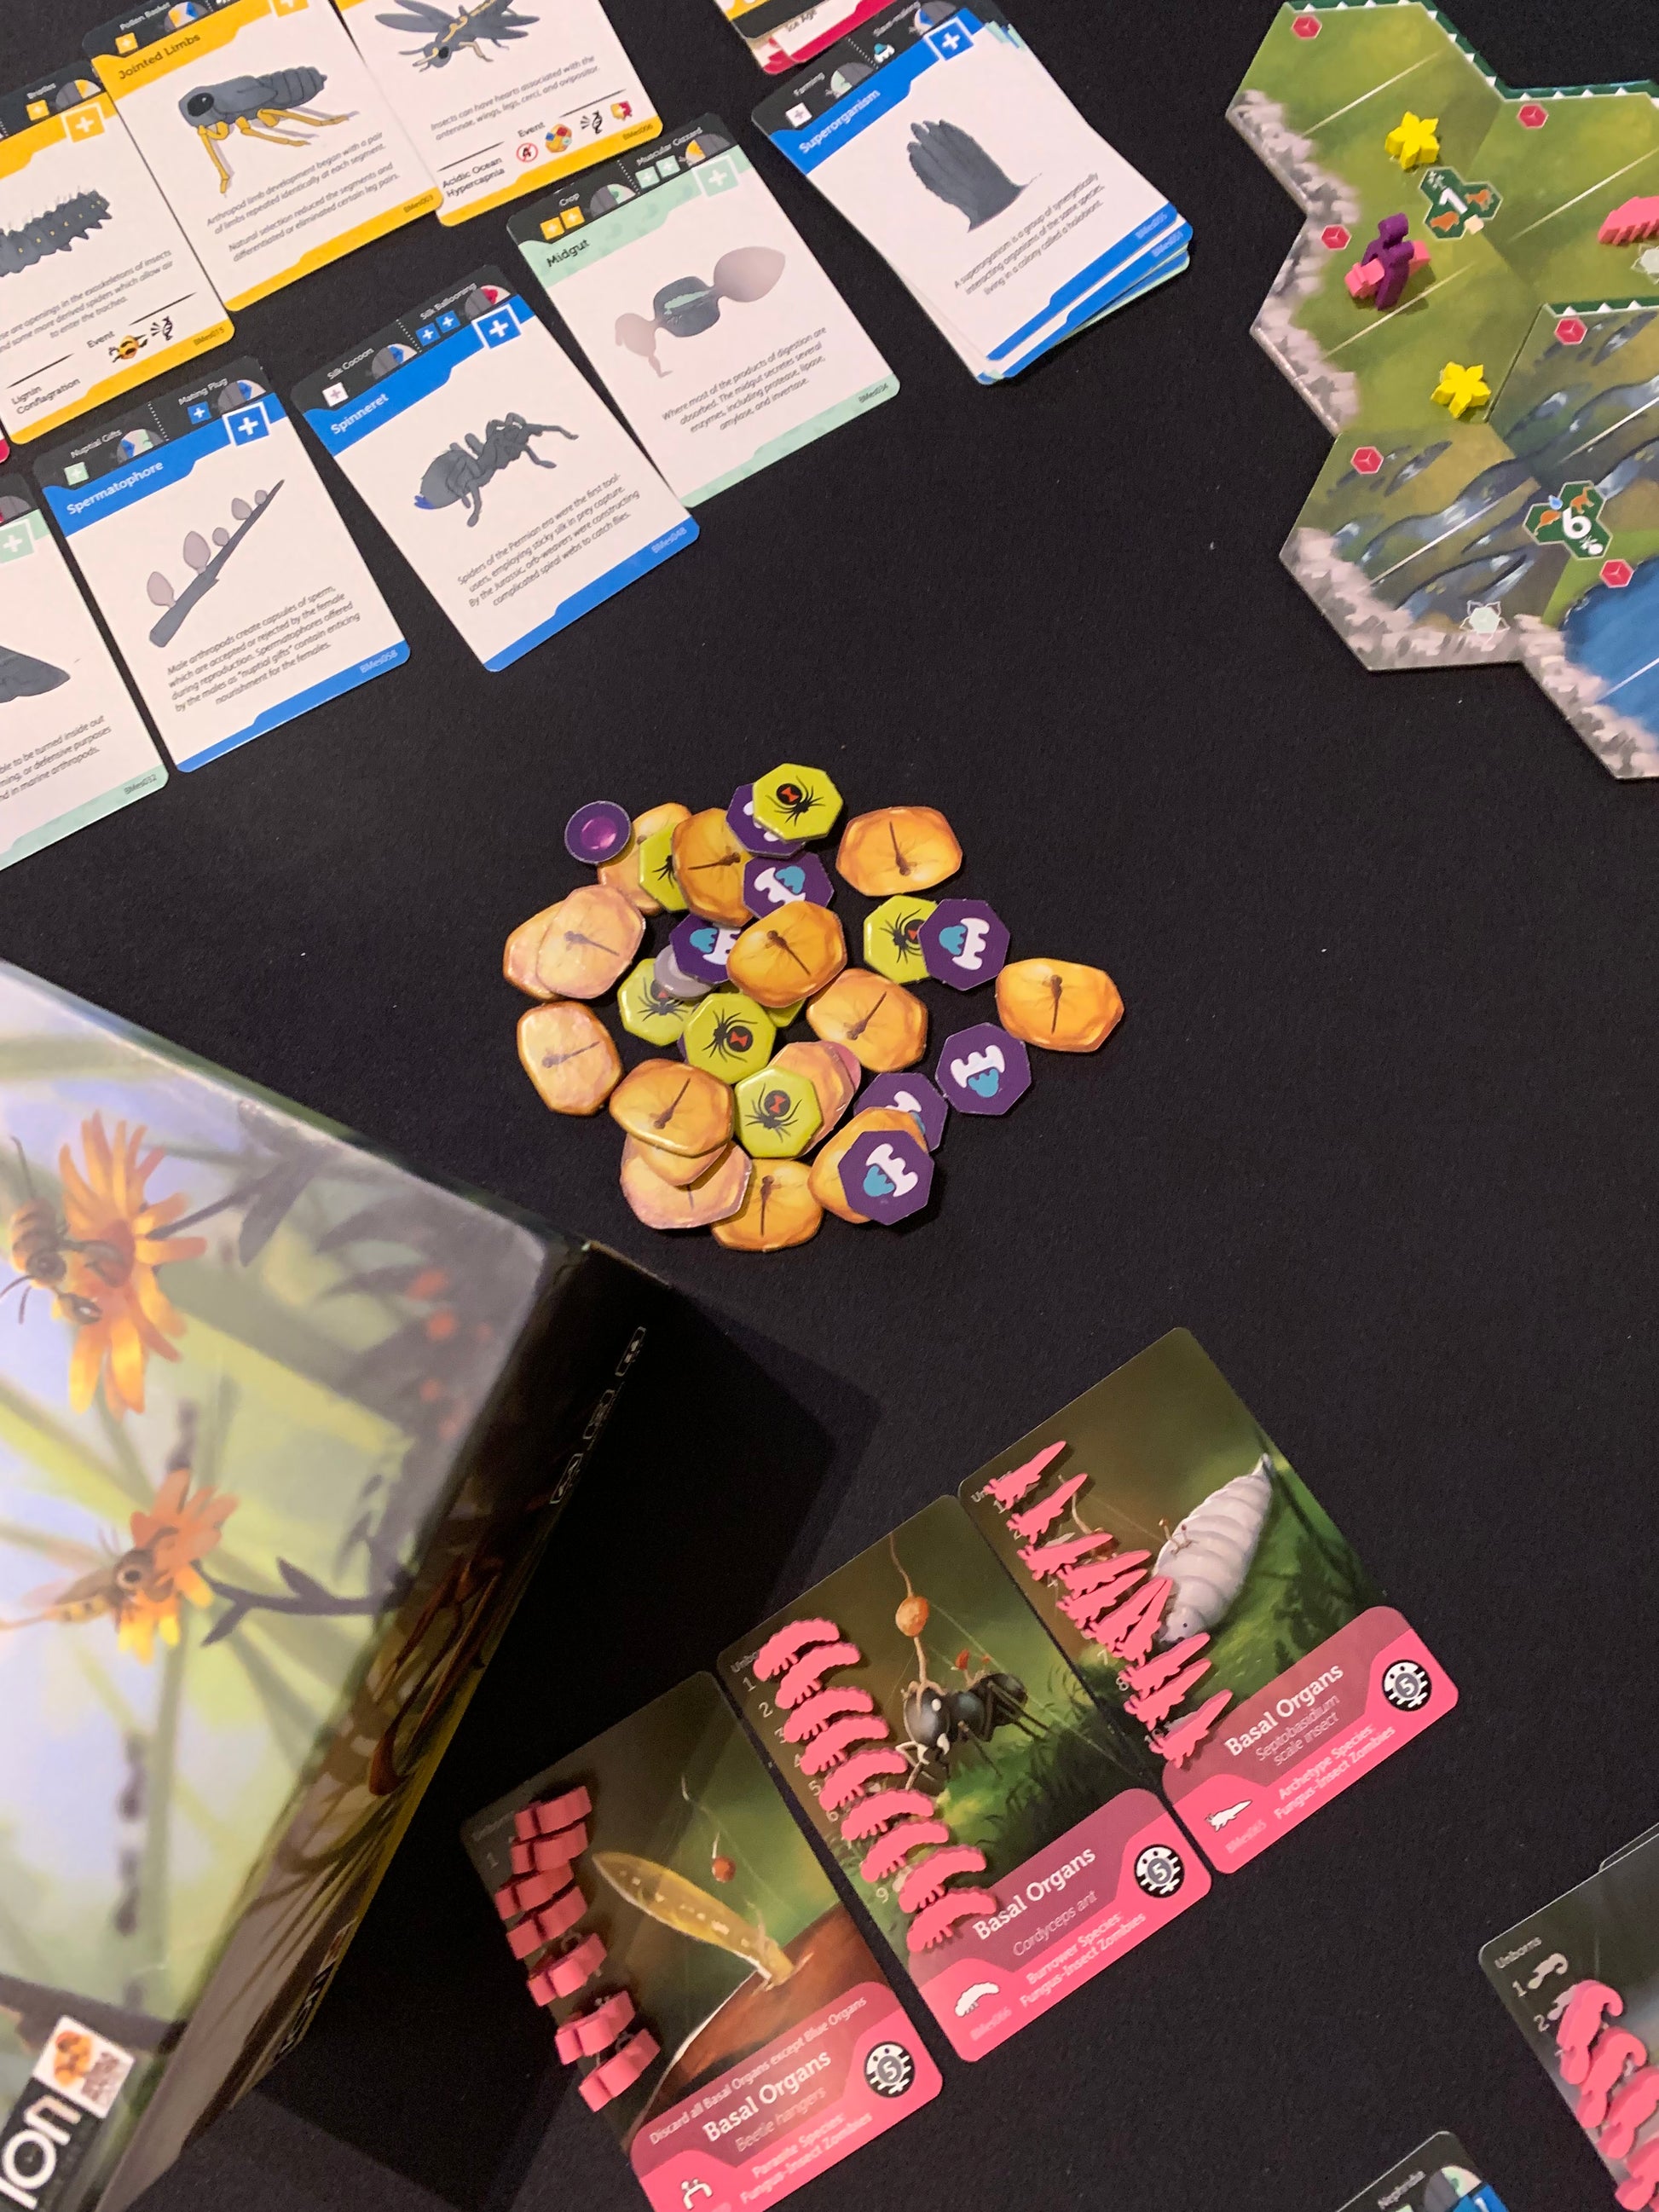 Bios: Mesofauna board game - Organized view of different game play cards, pieces, and dice